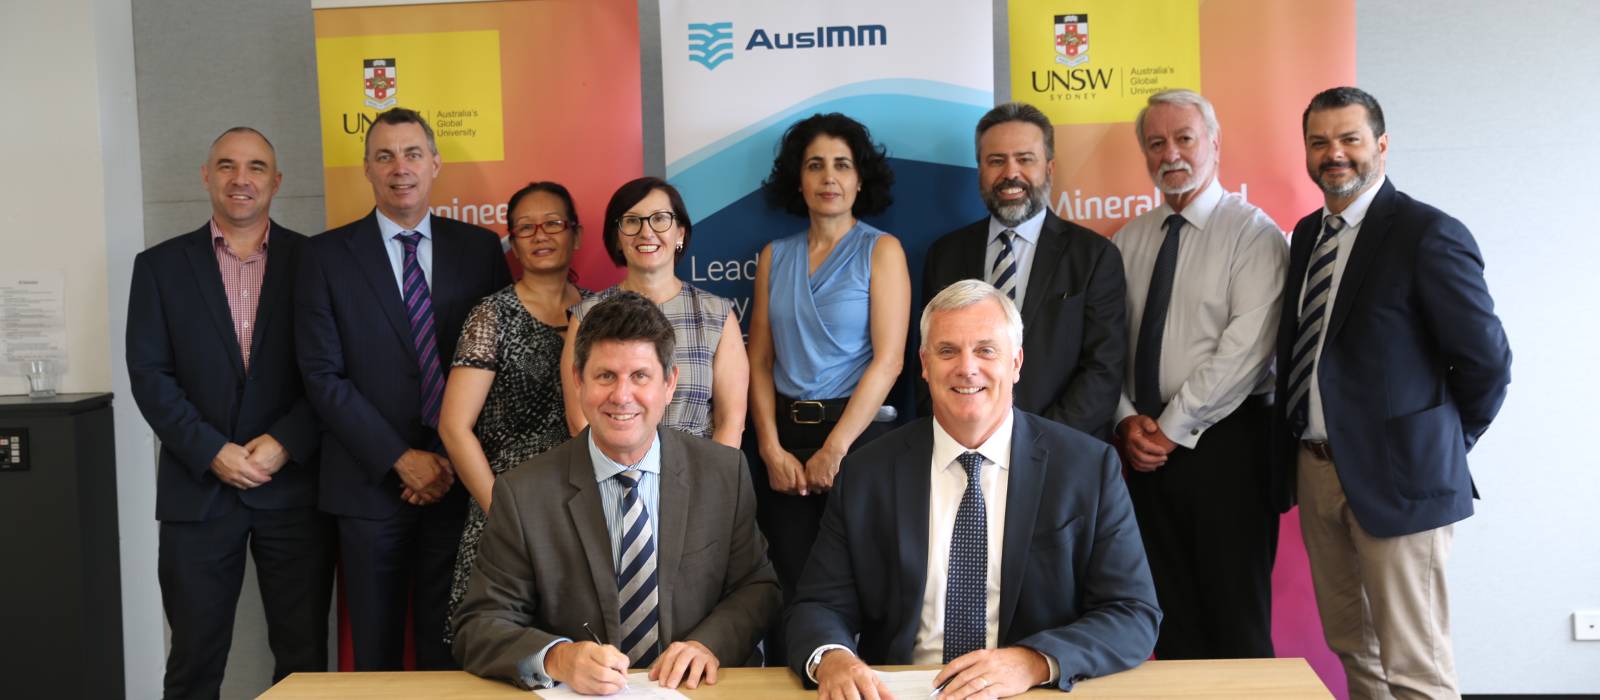 AusIMM CEO Stephen Durkin and Dean of Engineering UNSW Mark Hoffman lead the partnership signing.